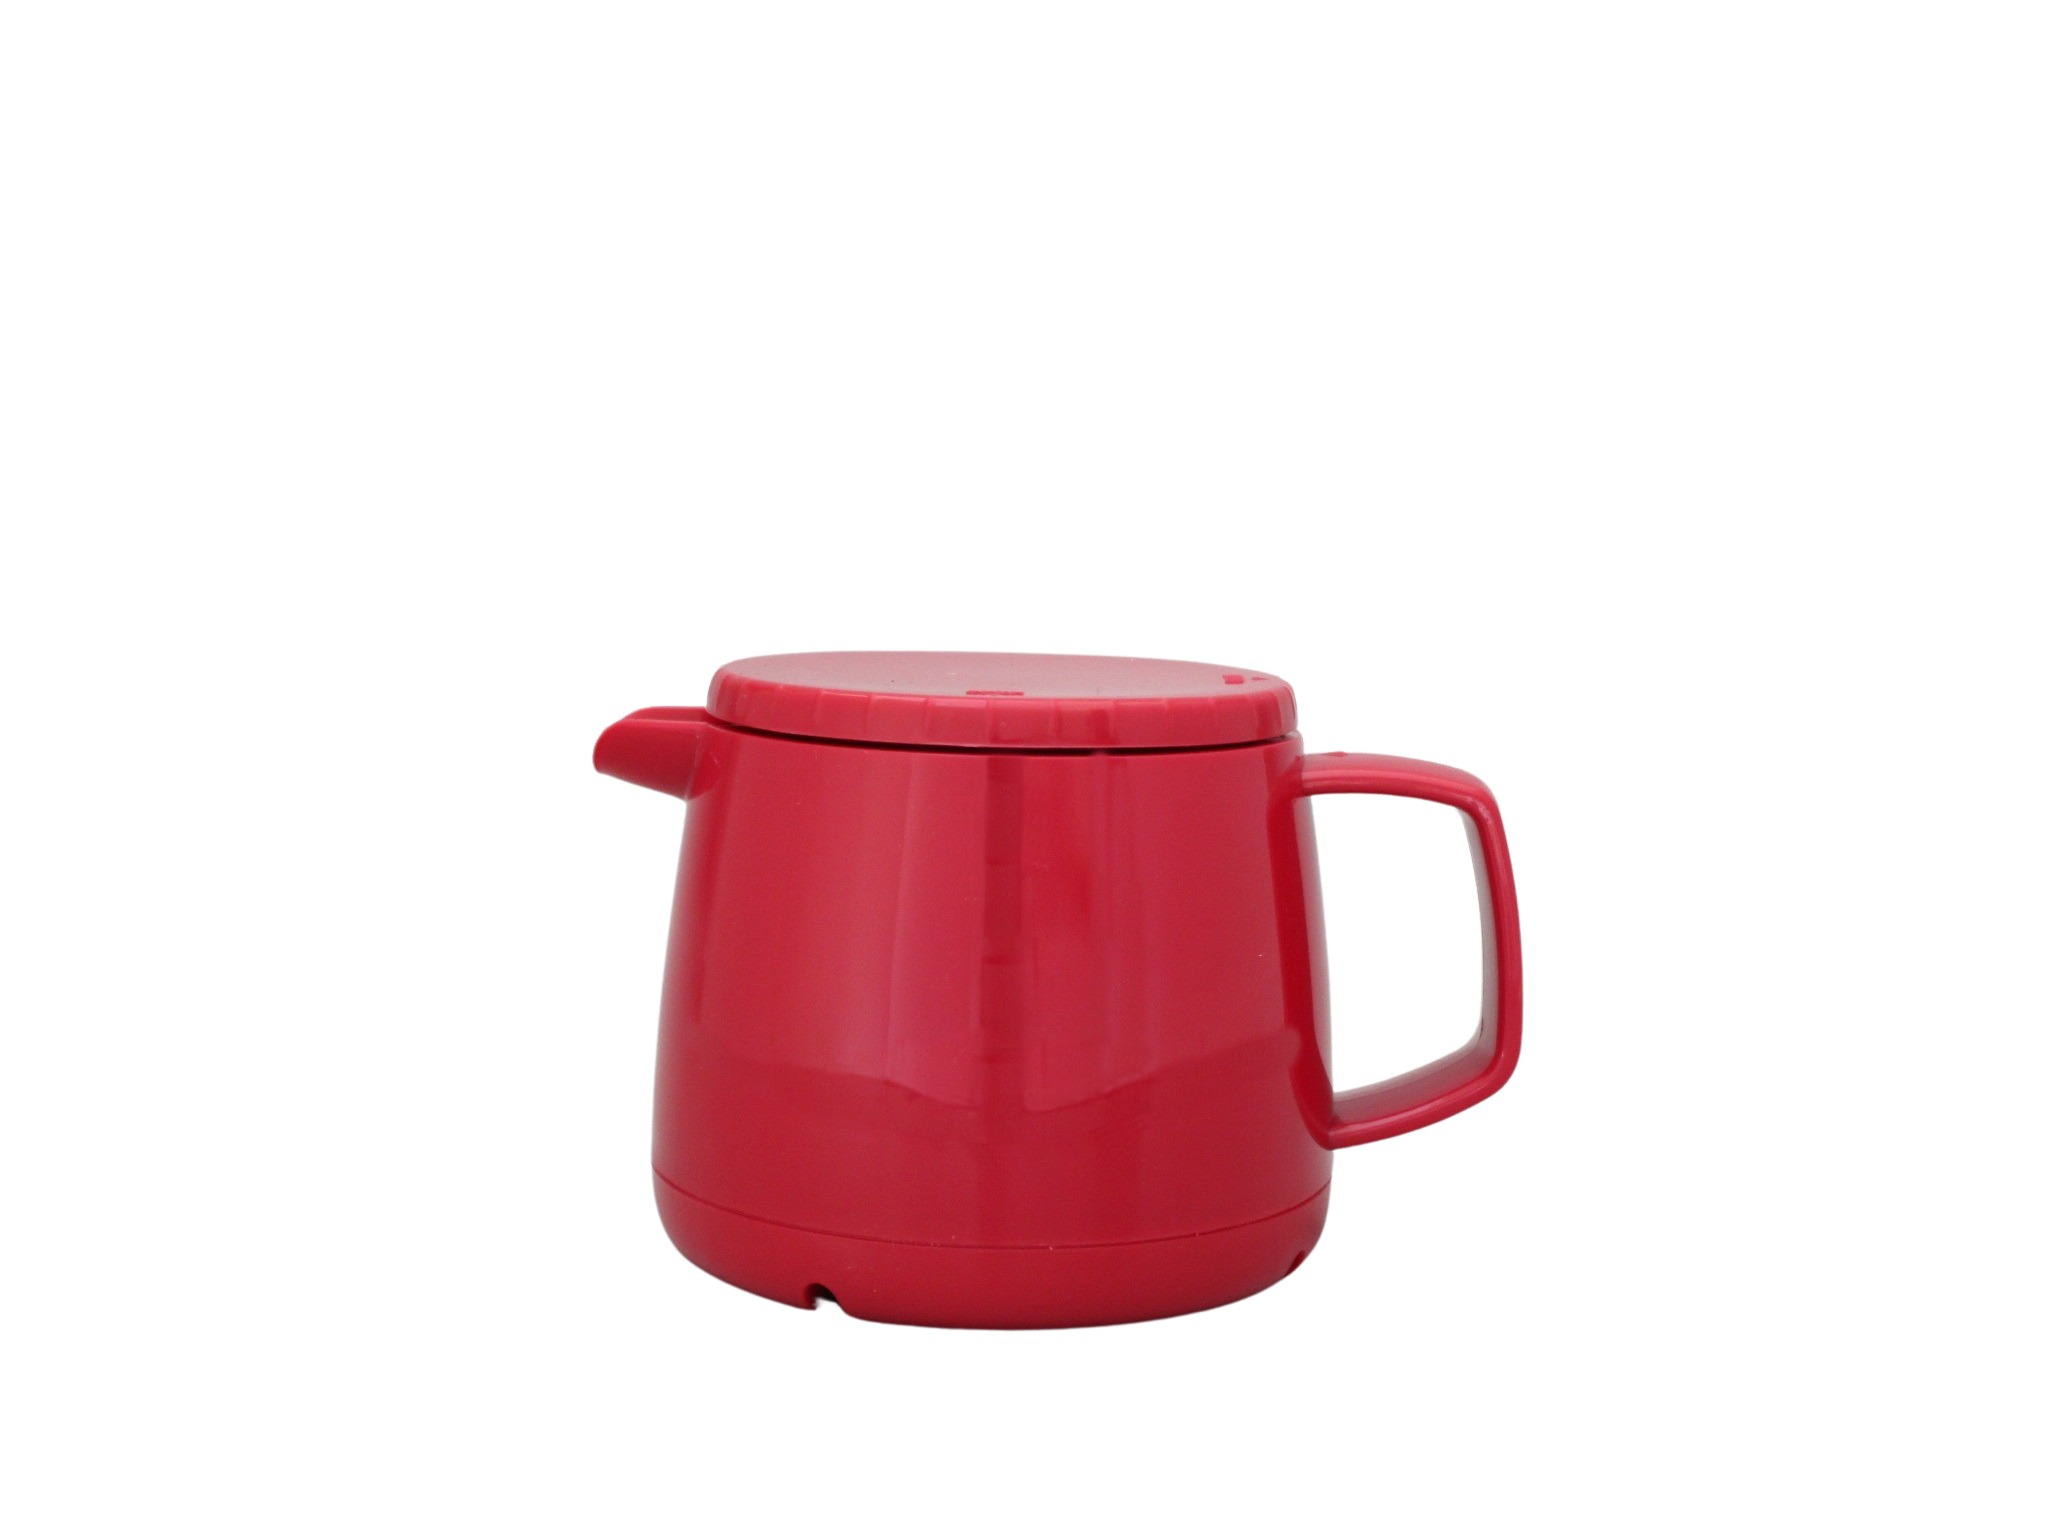 JAZZ030-046 - Pichet isotherme taille basse rouge 0.30 L - Isobel